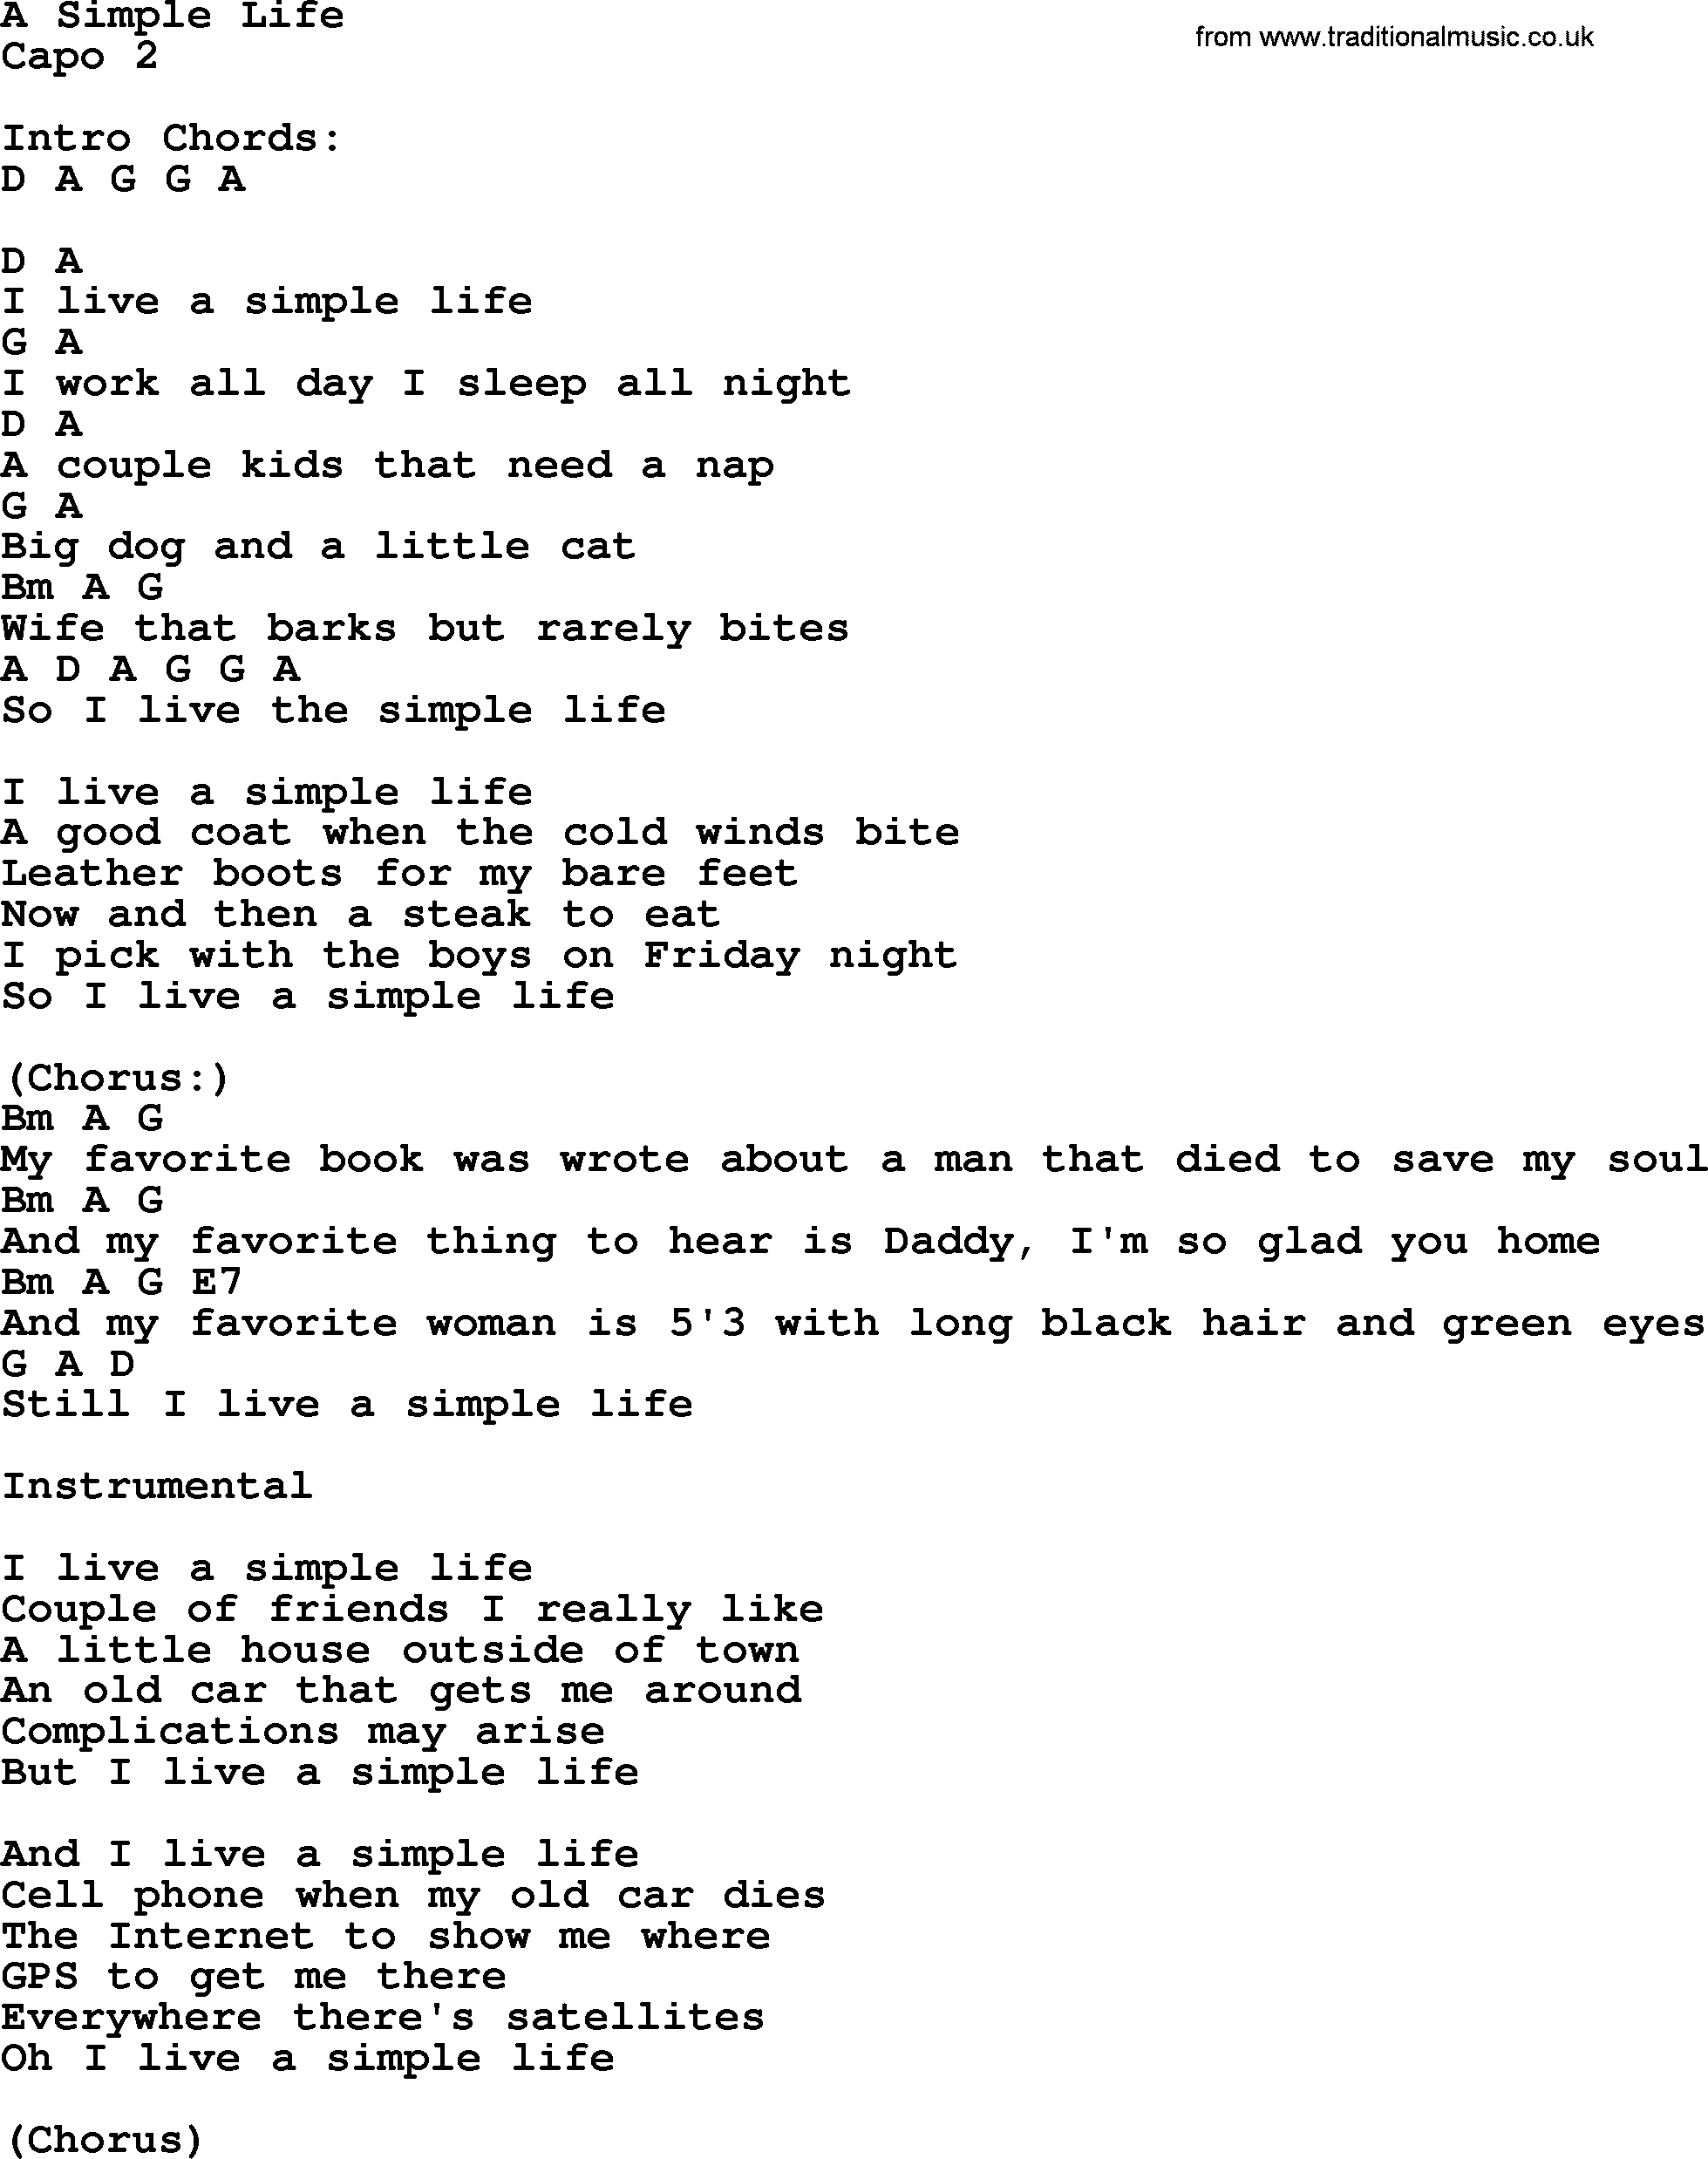 Bluegrass song: A Simple Life, lyrics and chords